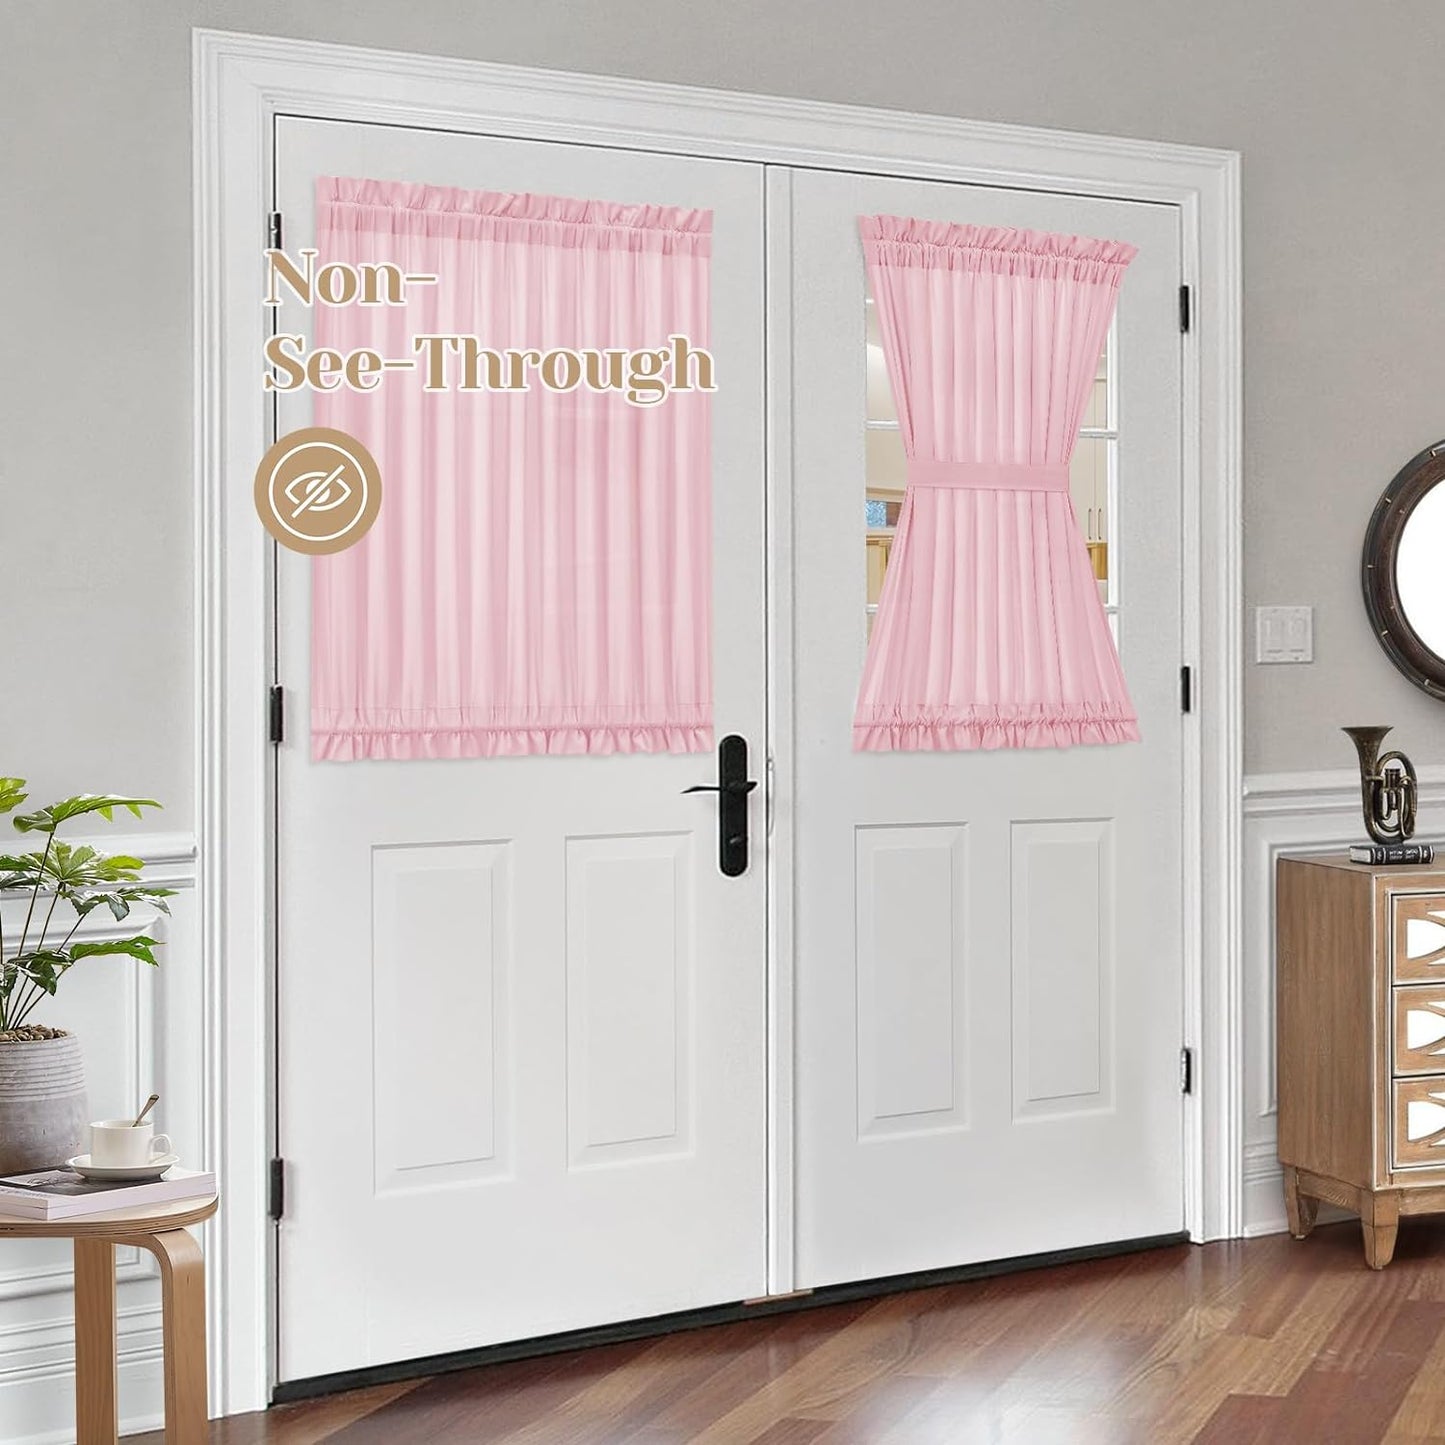 HOMEIDEAS Non-See-Through Sidelight Curtains for Front Door, Privacy Semi Sheer Door Window Curtains, Rod Pocket Light Filtering French Door Curtains with Tieback, (1 Panel, White, 26W X 72L)  HOMEIDEAS Light Pink 2 Panels-54 X 40 